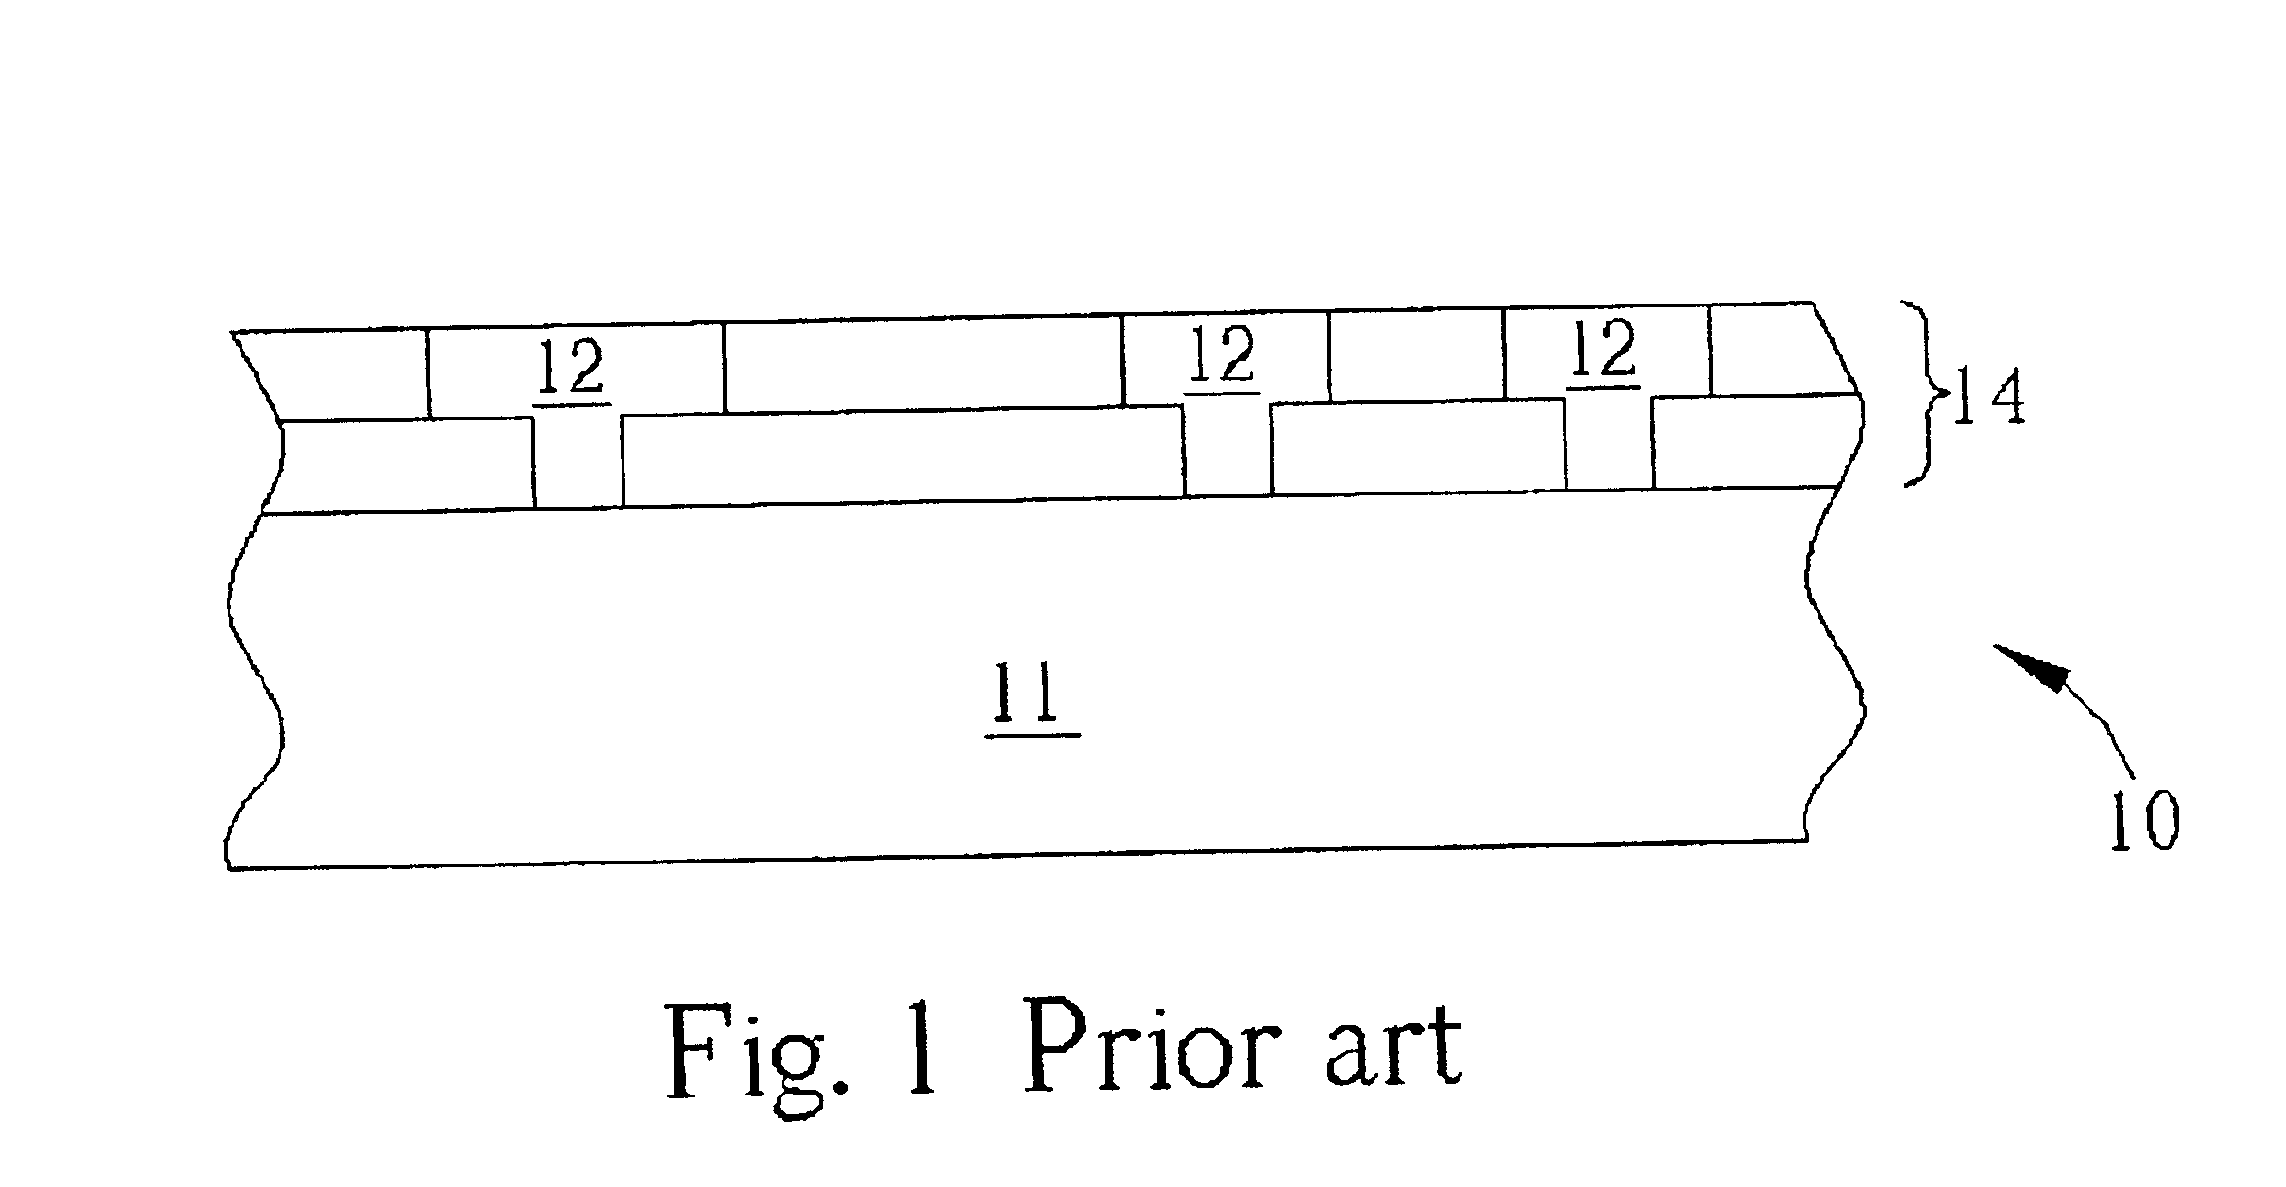 Method of forming a fuse